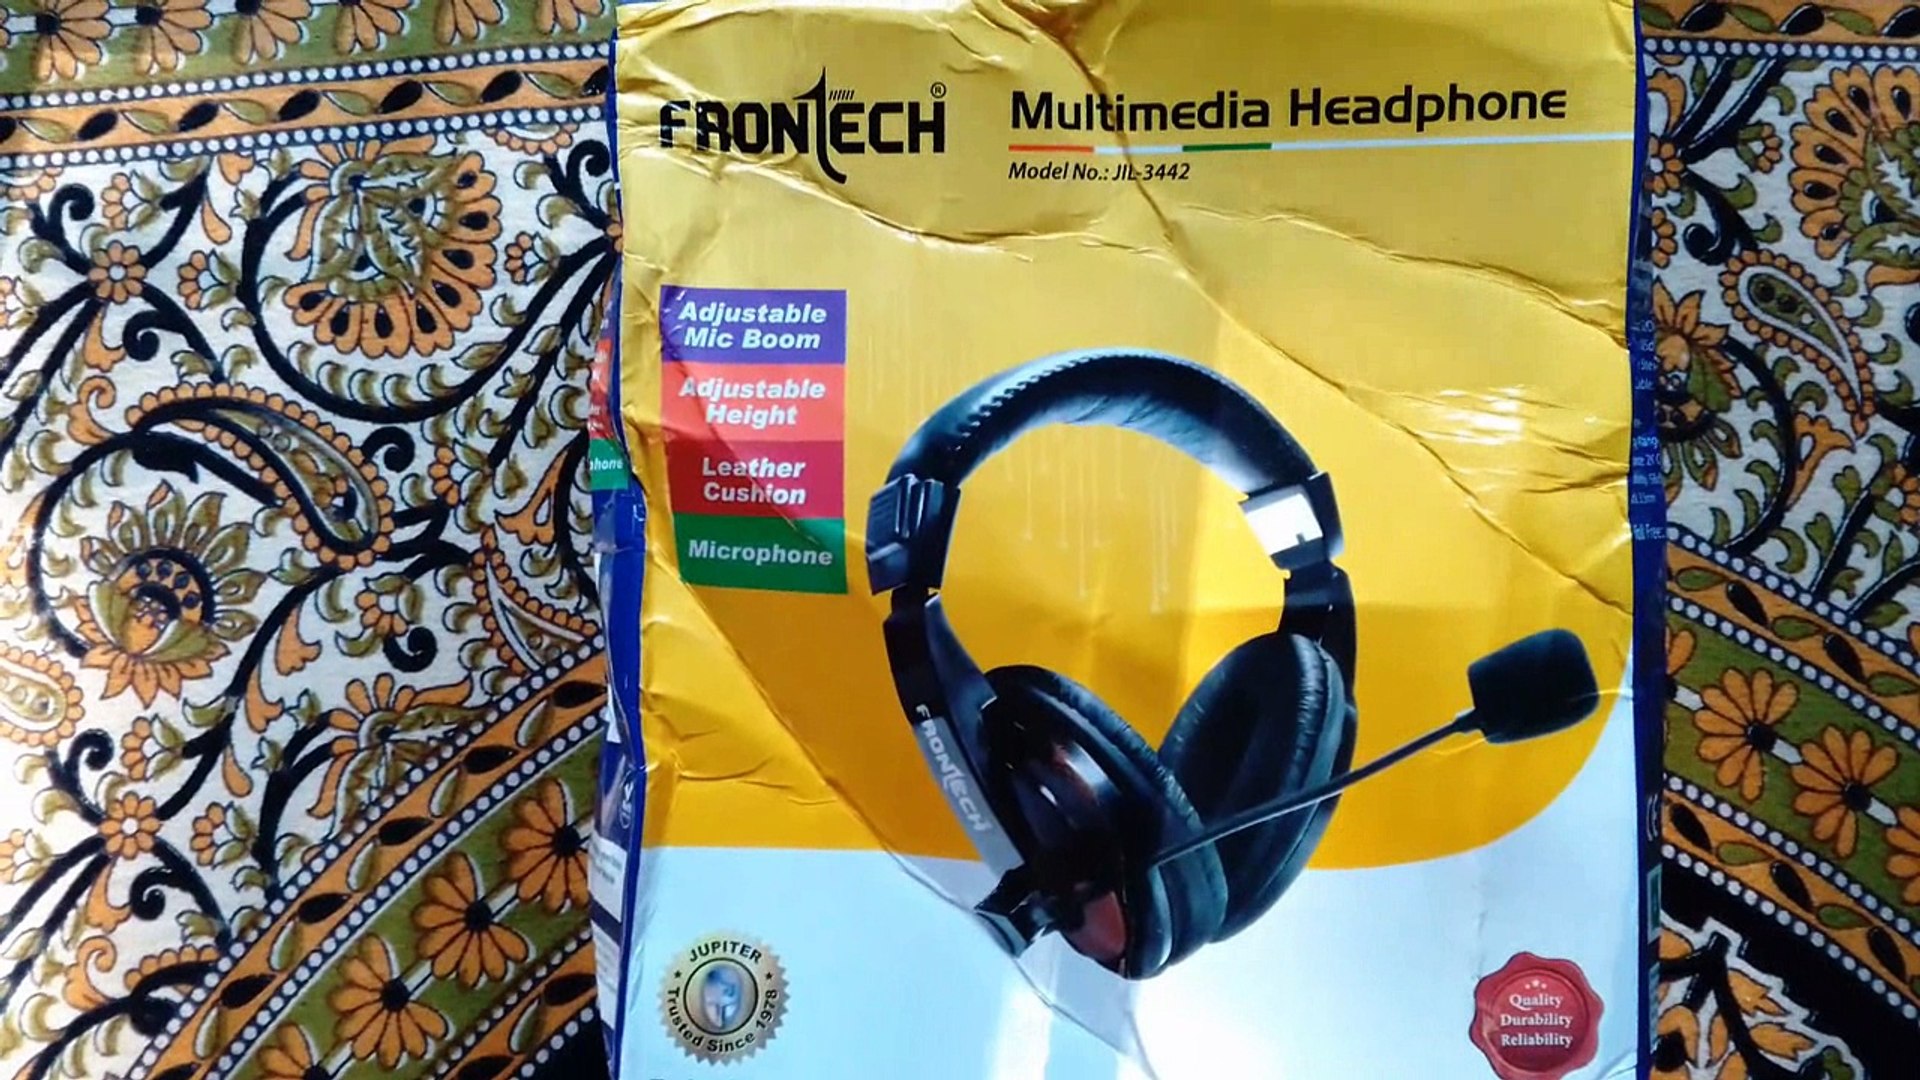 frontech headphone with mic || frontech jil 3442 - video Dailymotion